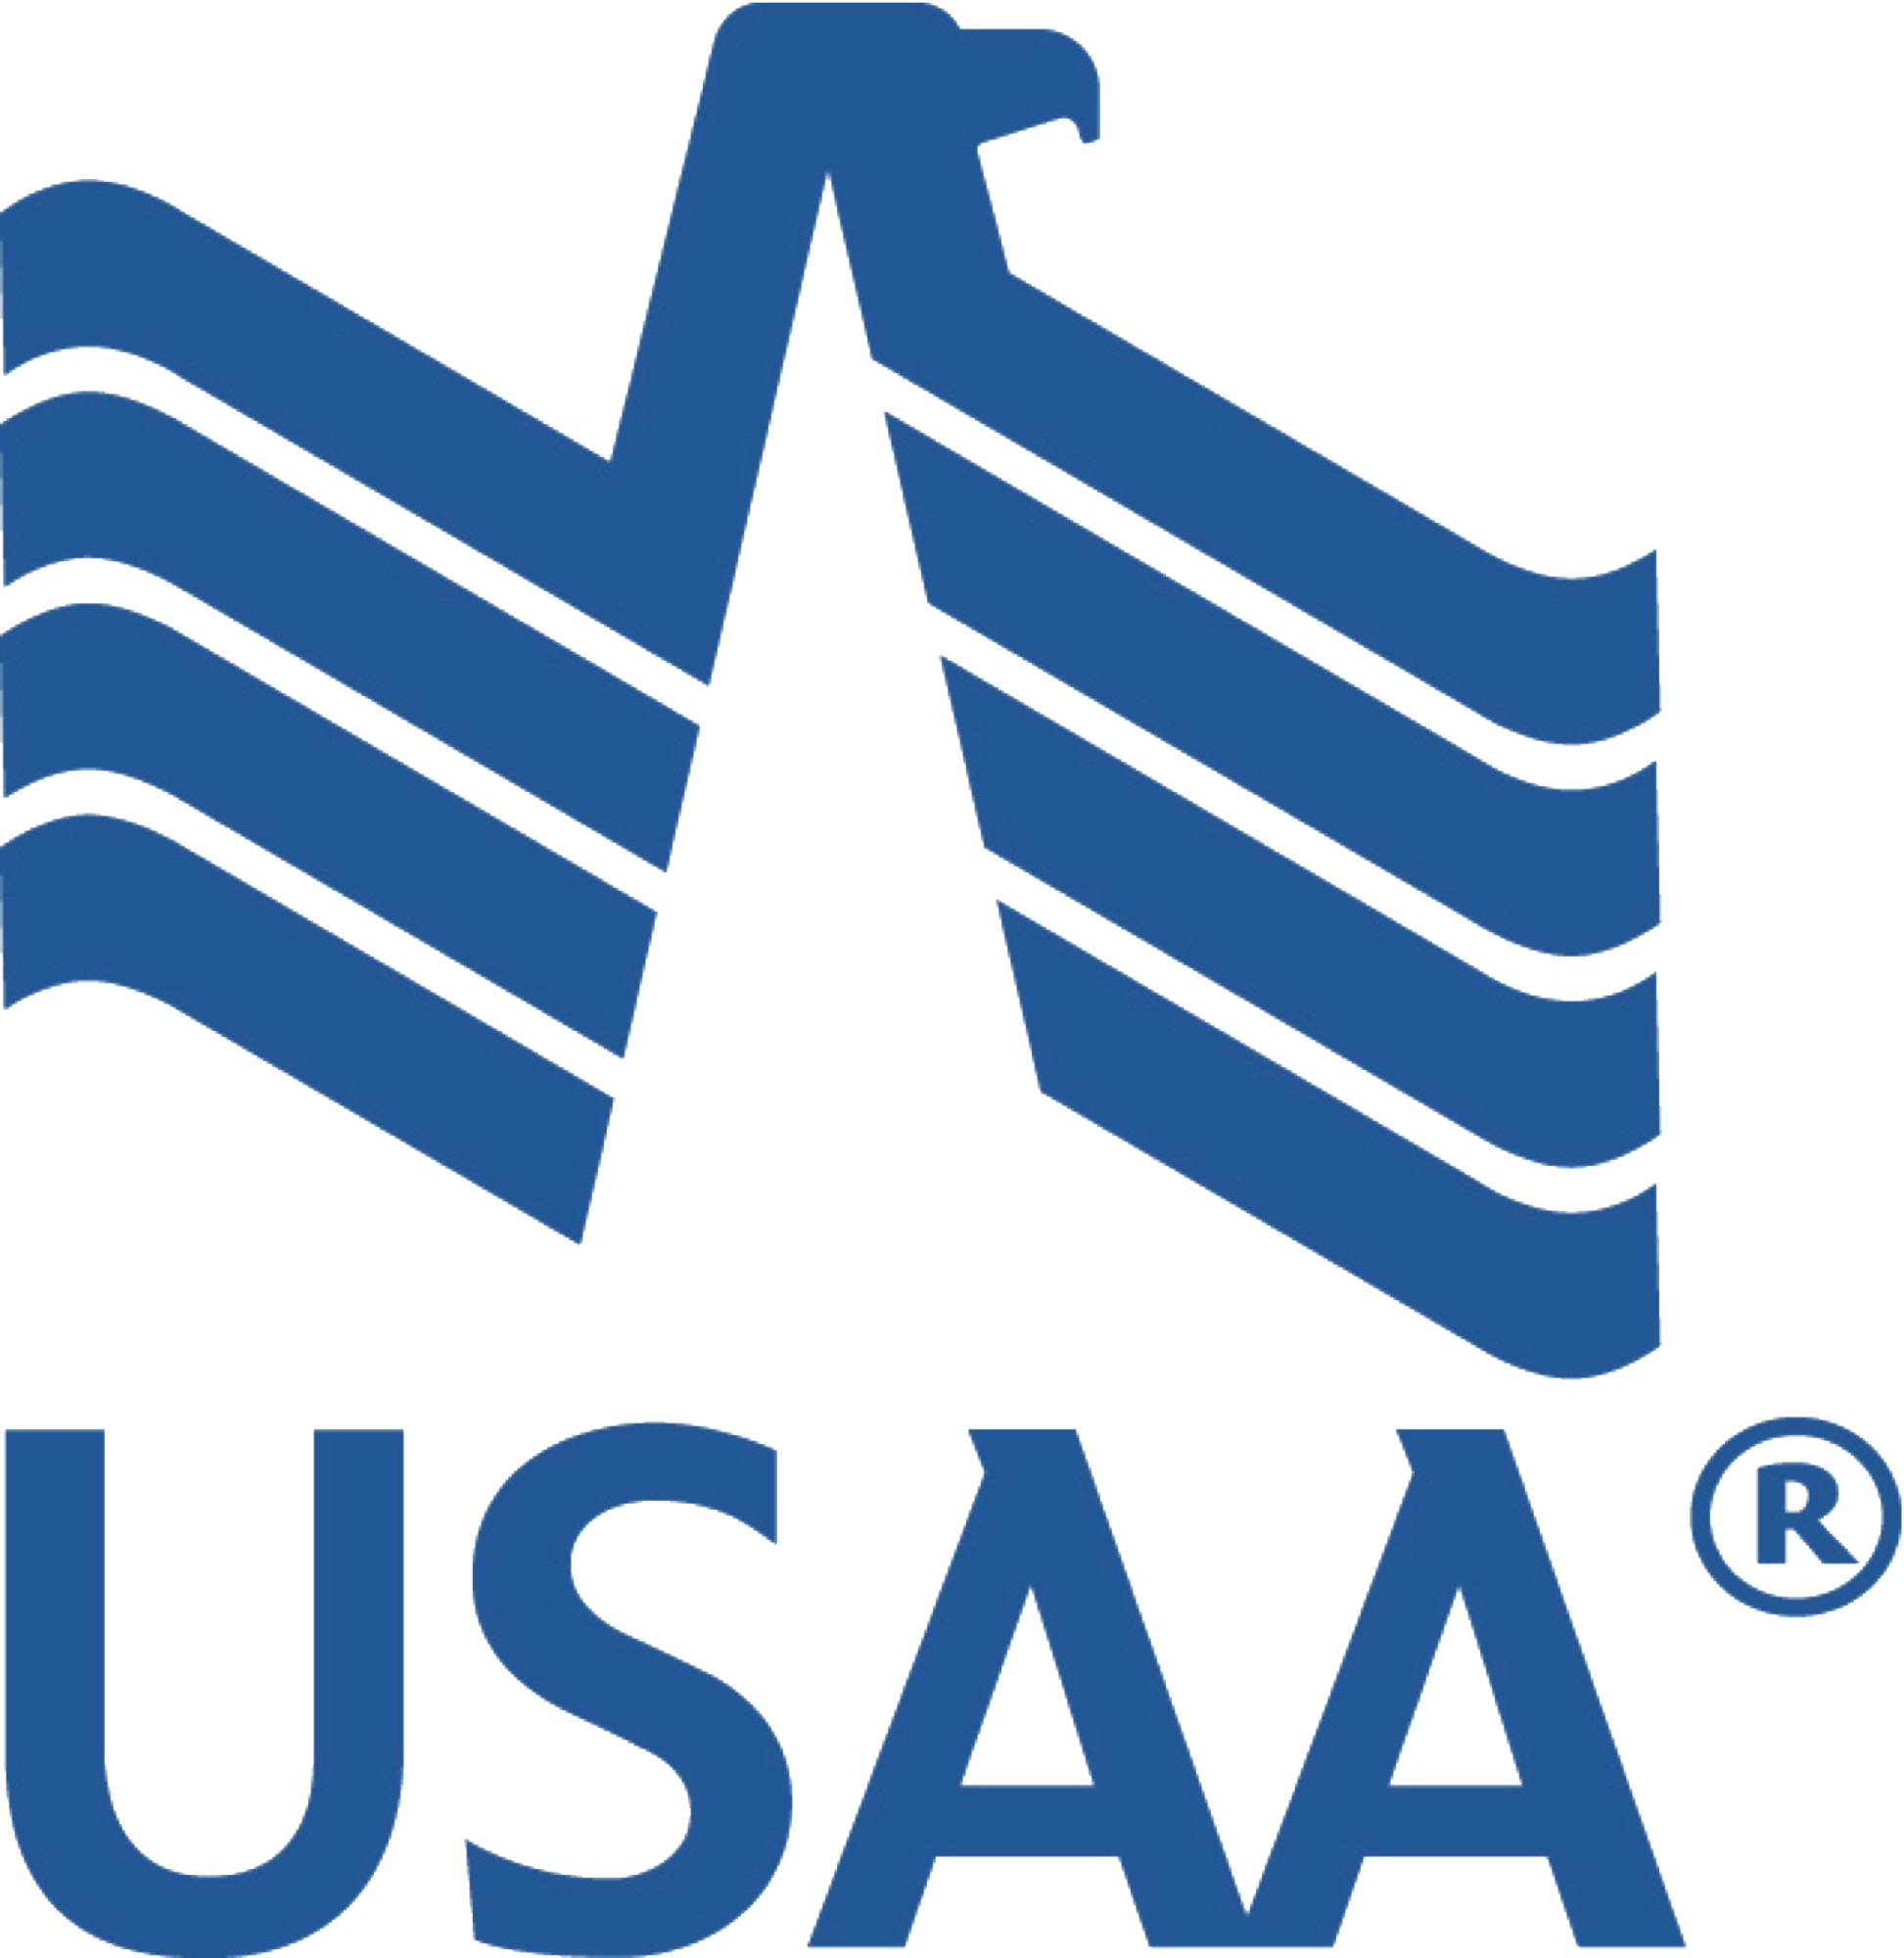 USAA.png